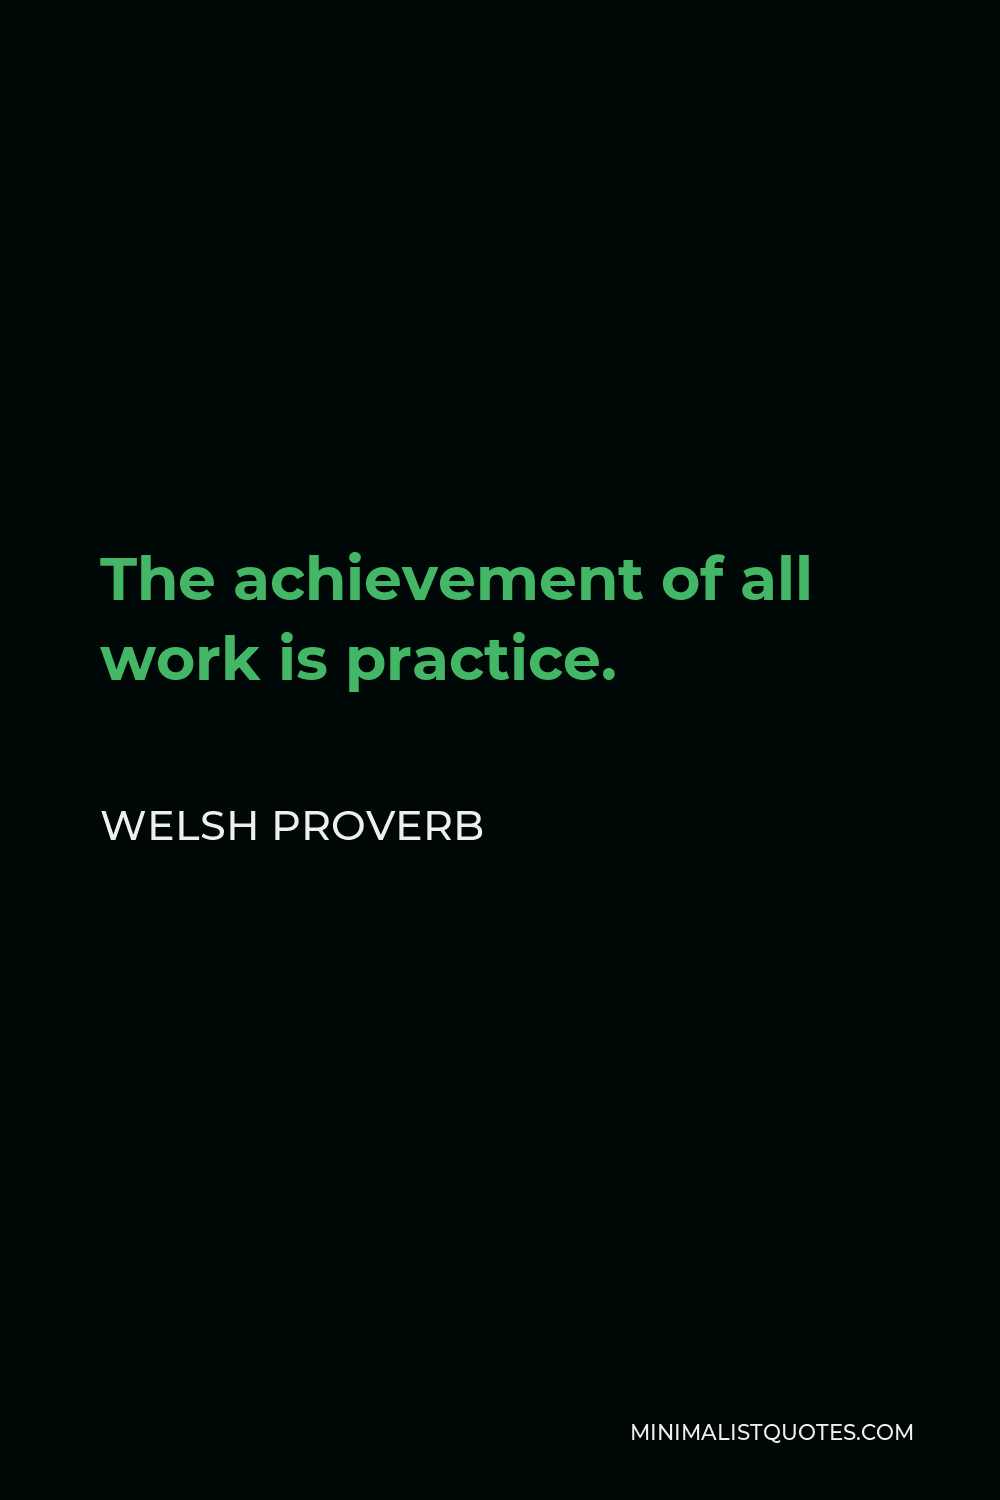 Welsh Proverb Quote - The achievement of all work is practice.